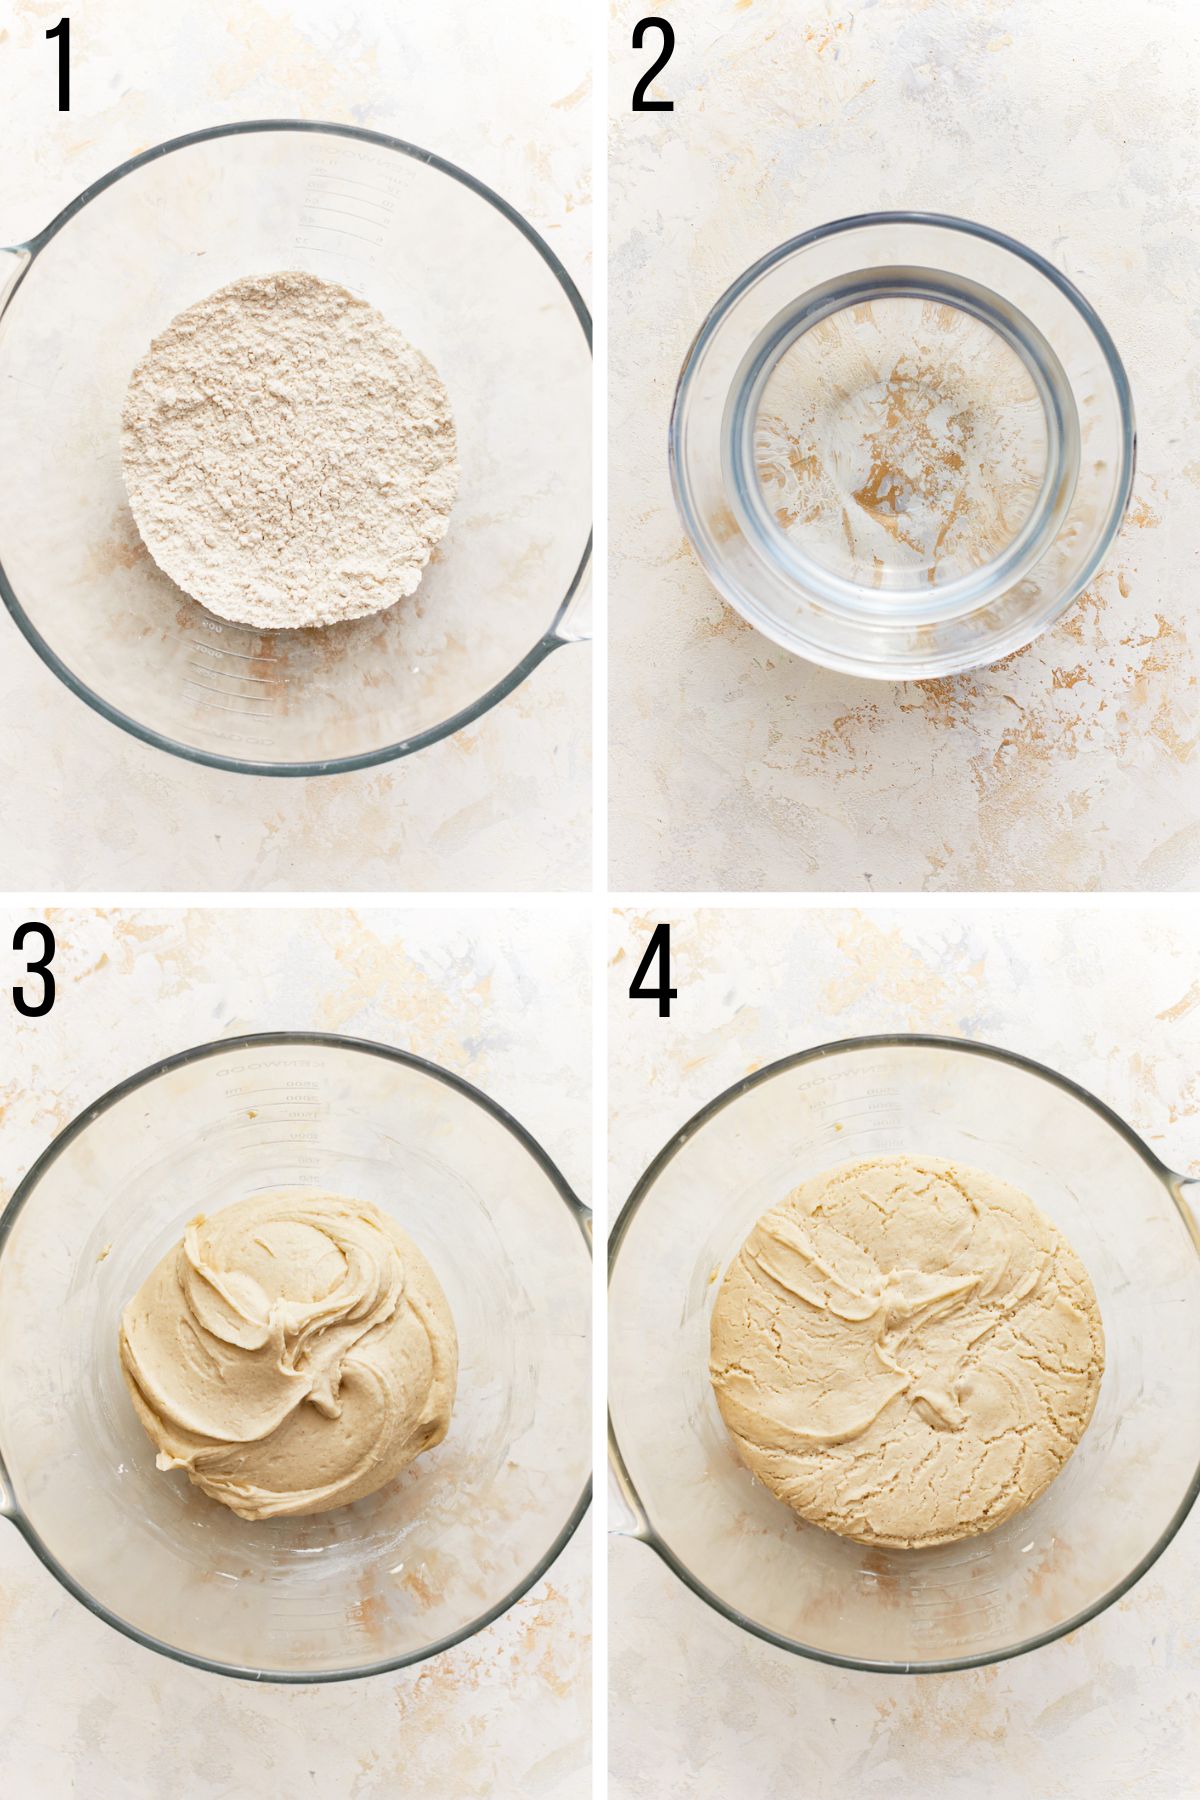 step by step photos for how to make gluten free pizza dough